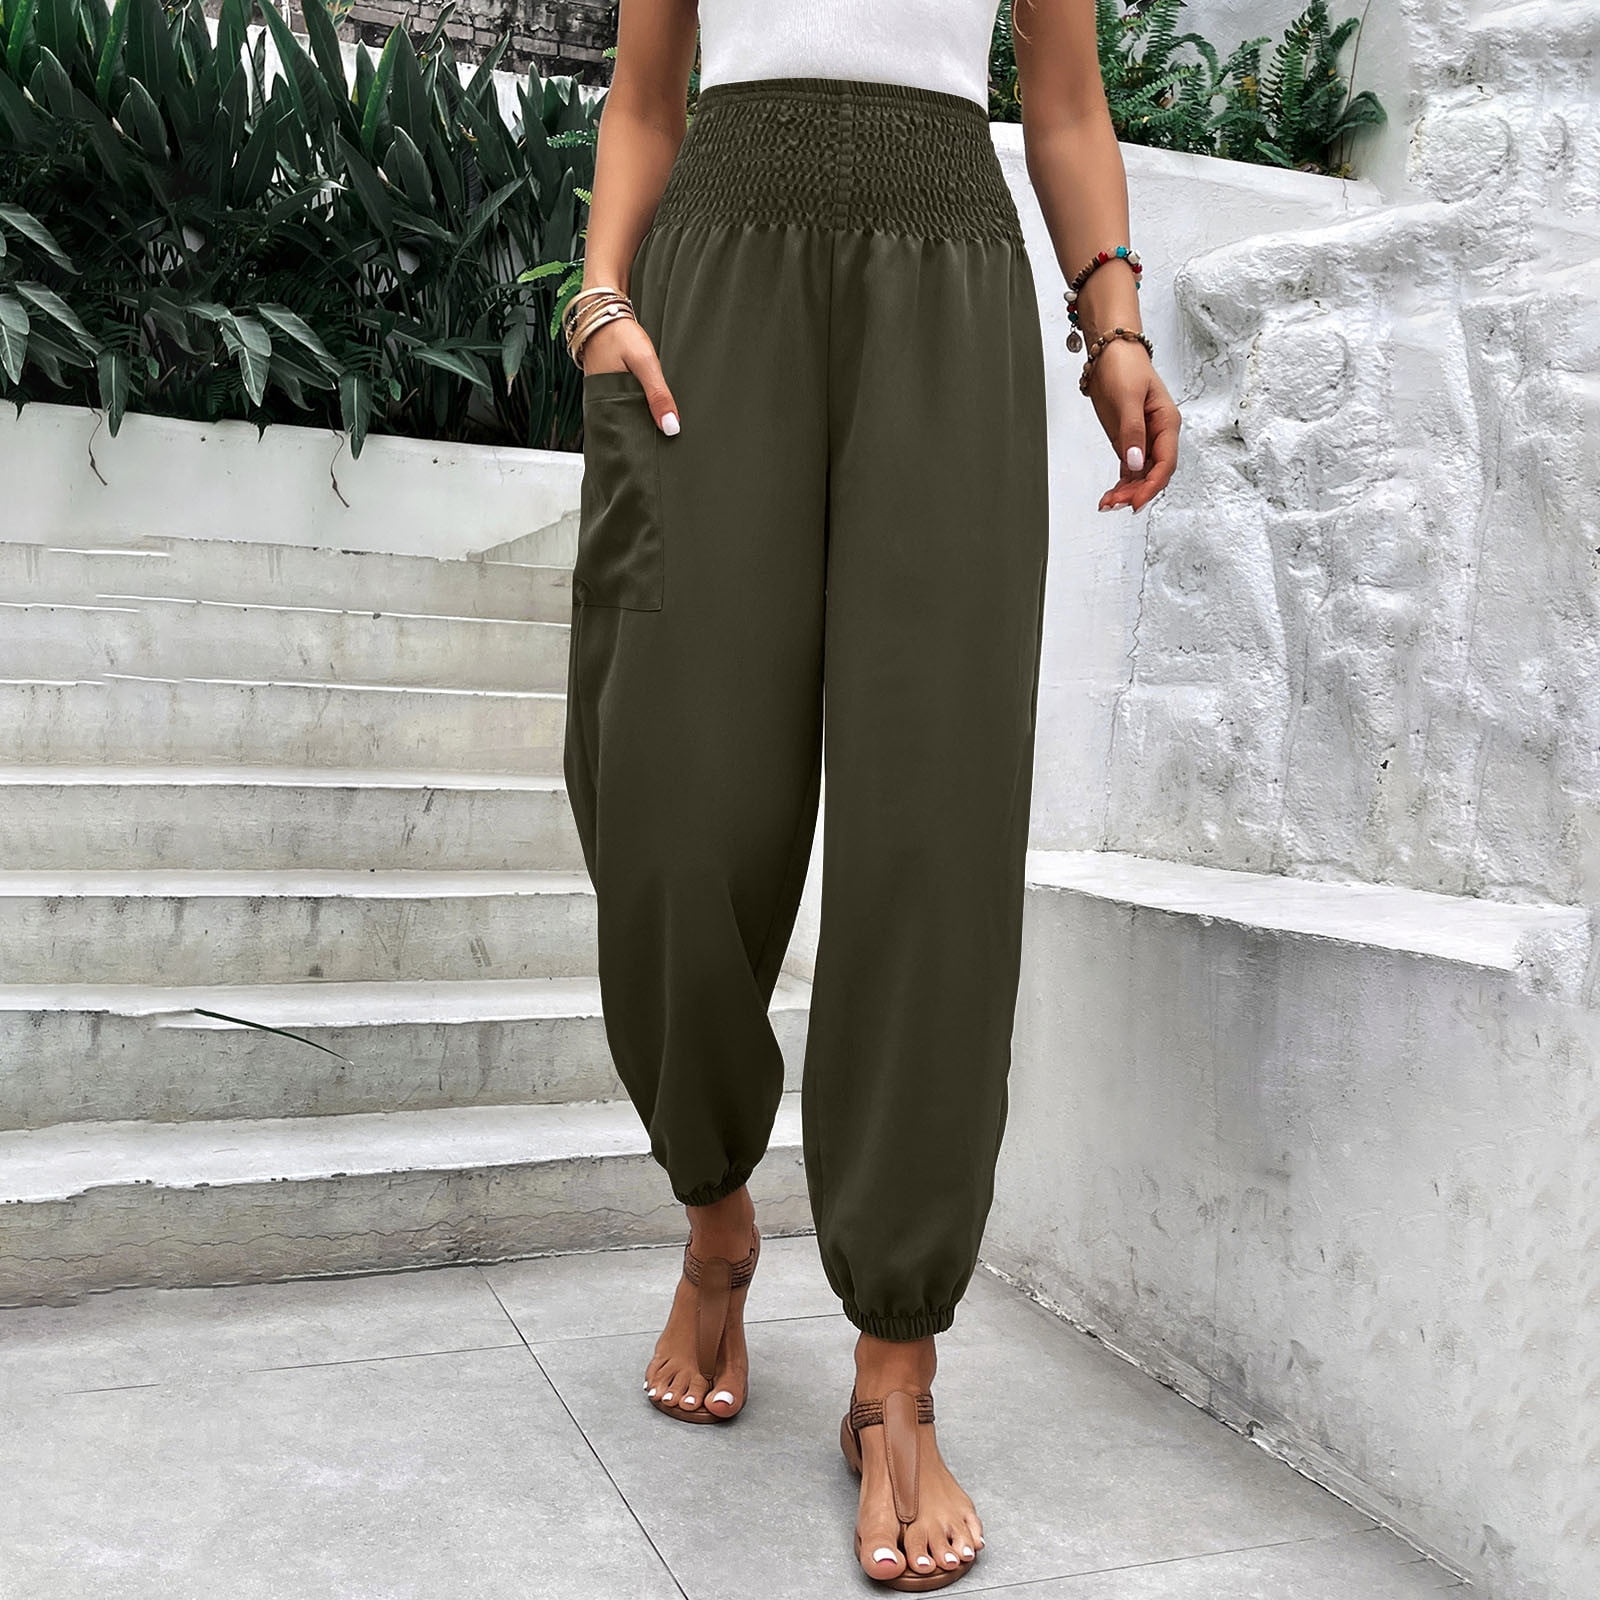 Jyeity Lots Of Styles And Prints, Solid Color Pants Straight Wide Leg  Trousers Pants With Pocket Women'S Athletic Pants Army Green Size 5XL(US:18)